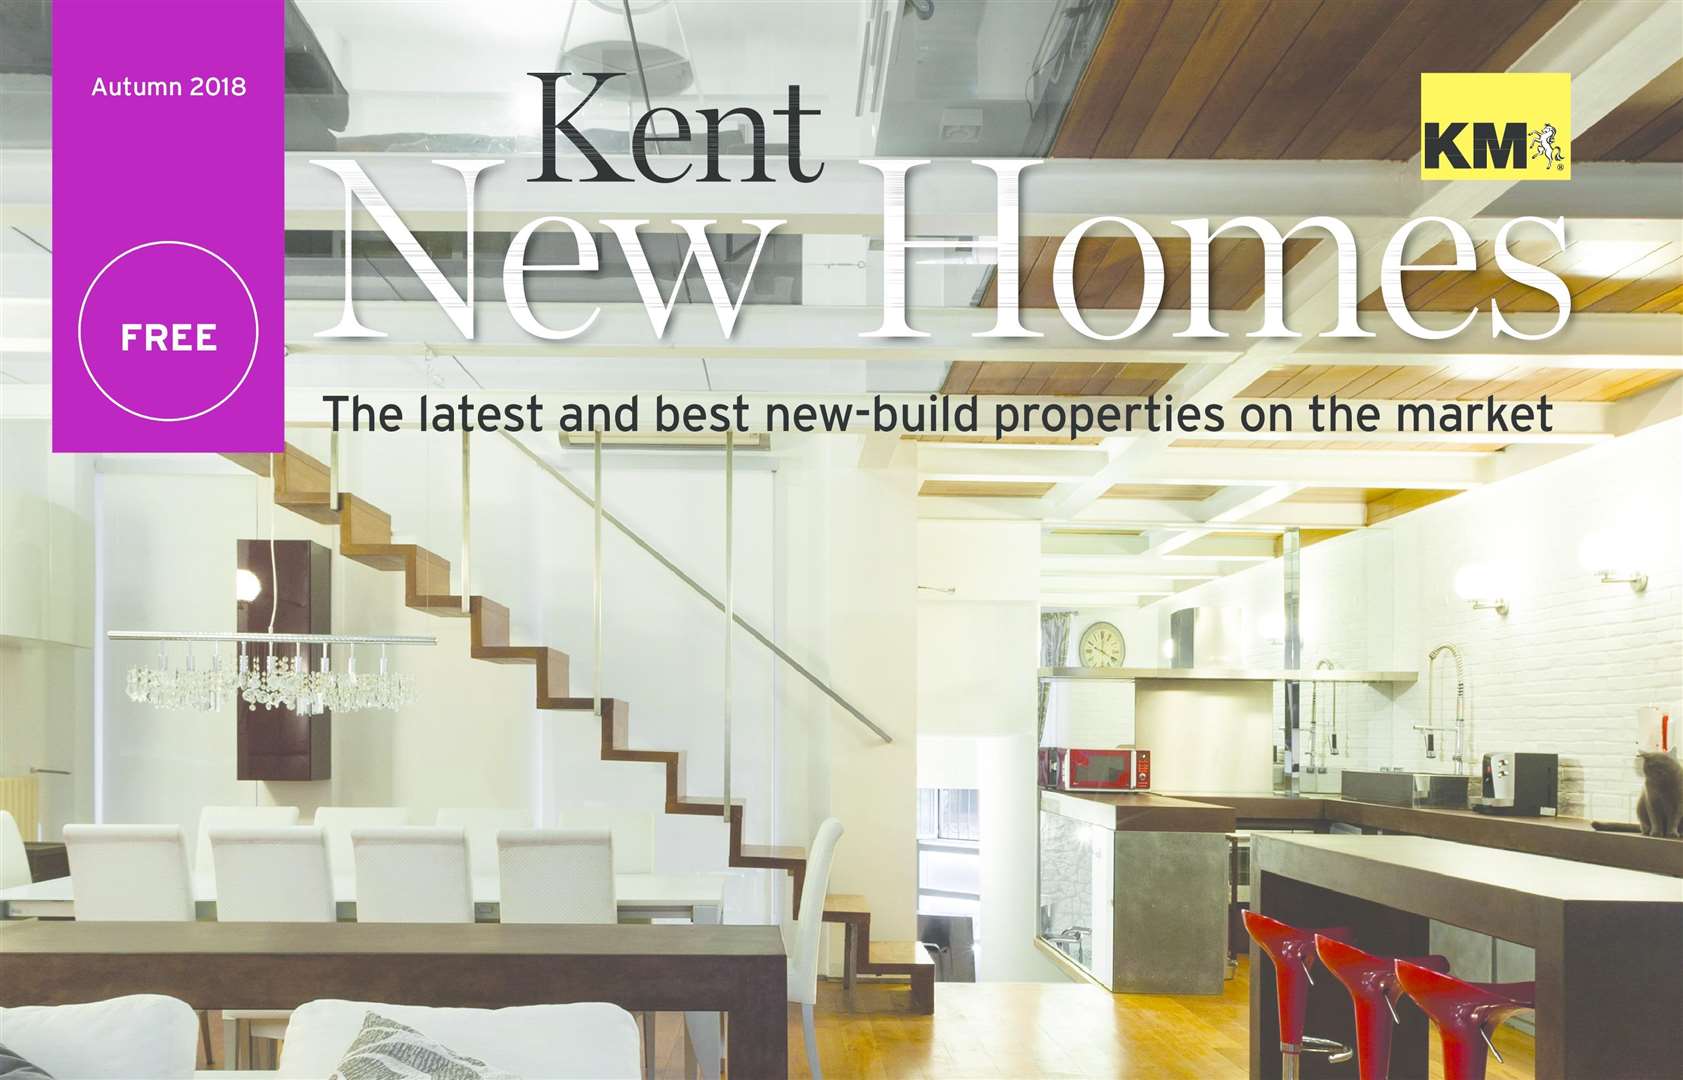 Kent New Homes supplement will be available this week (4211594)